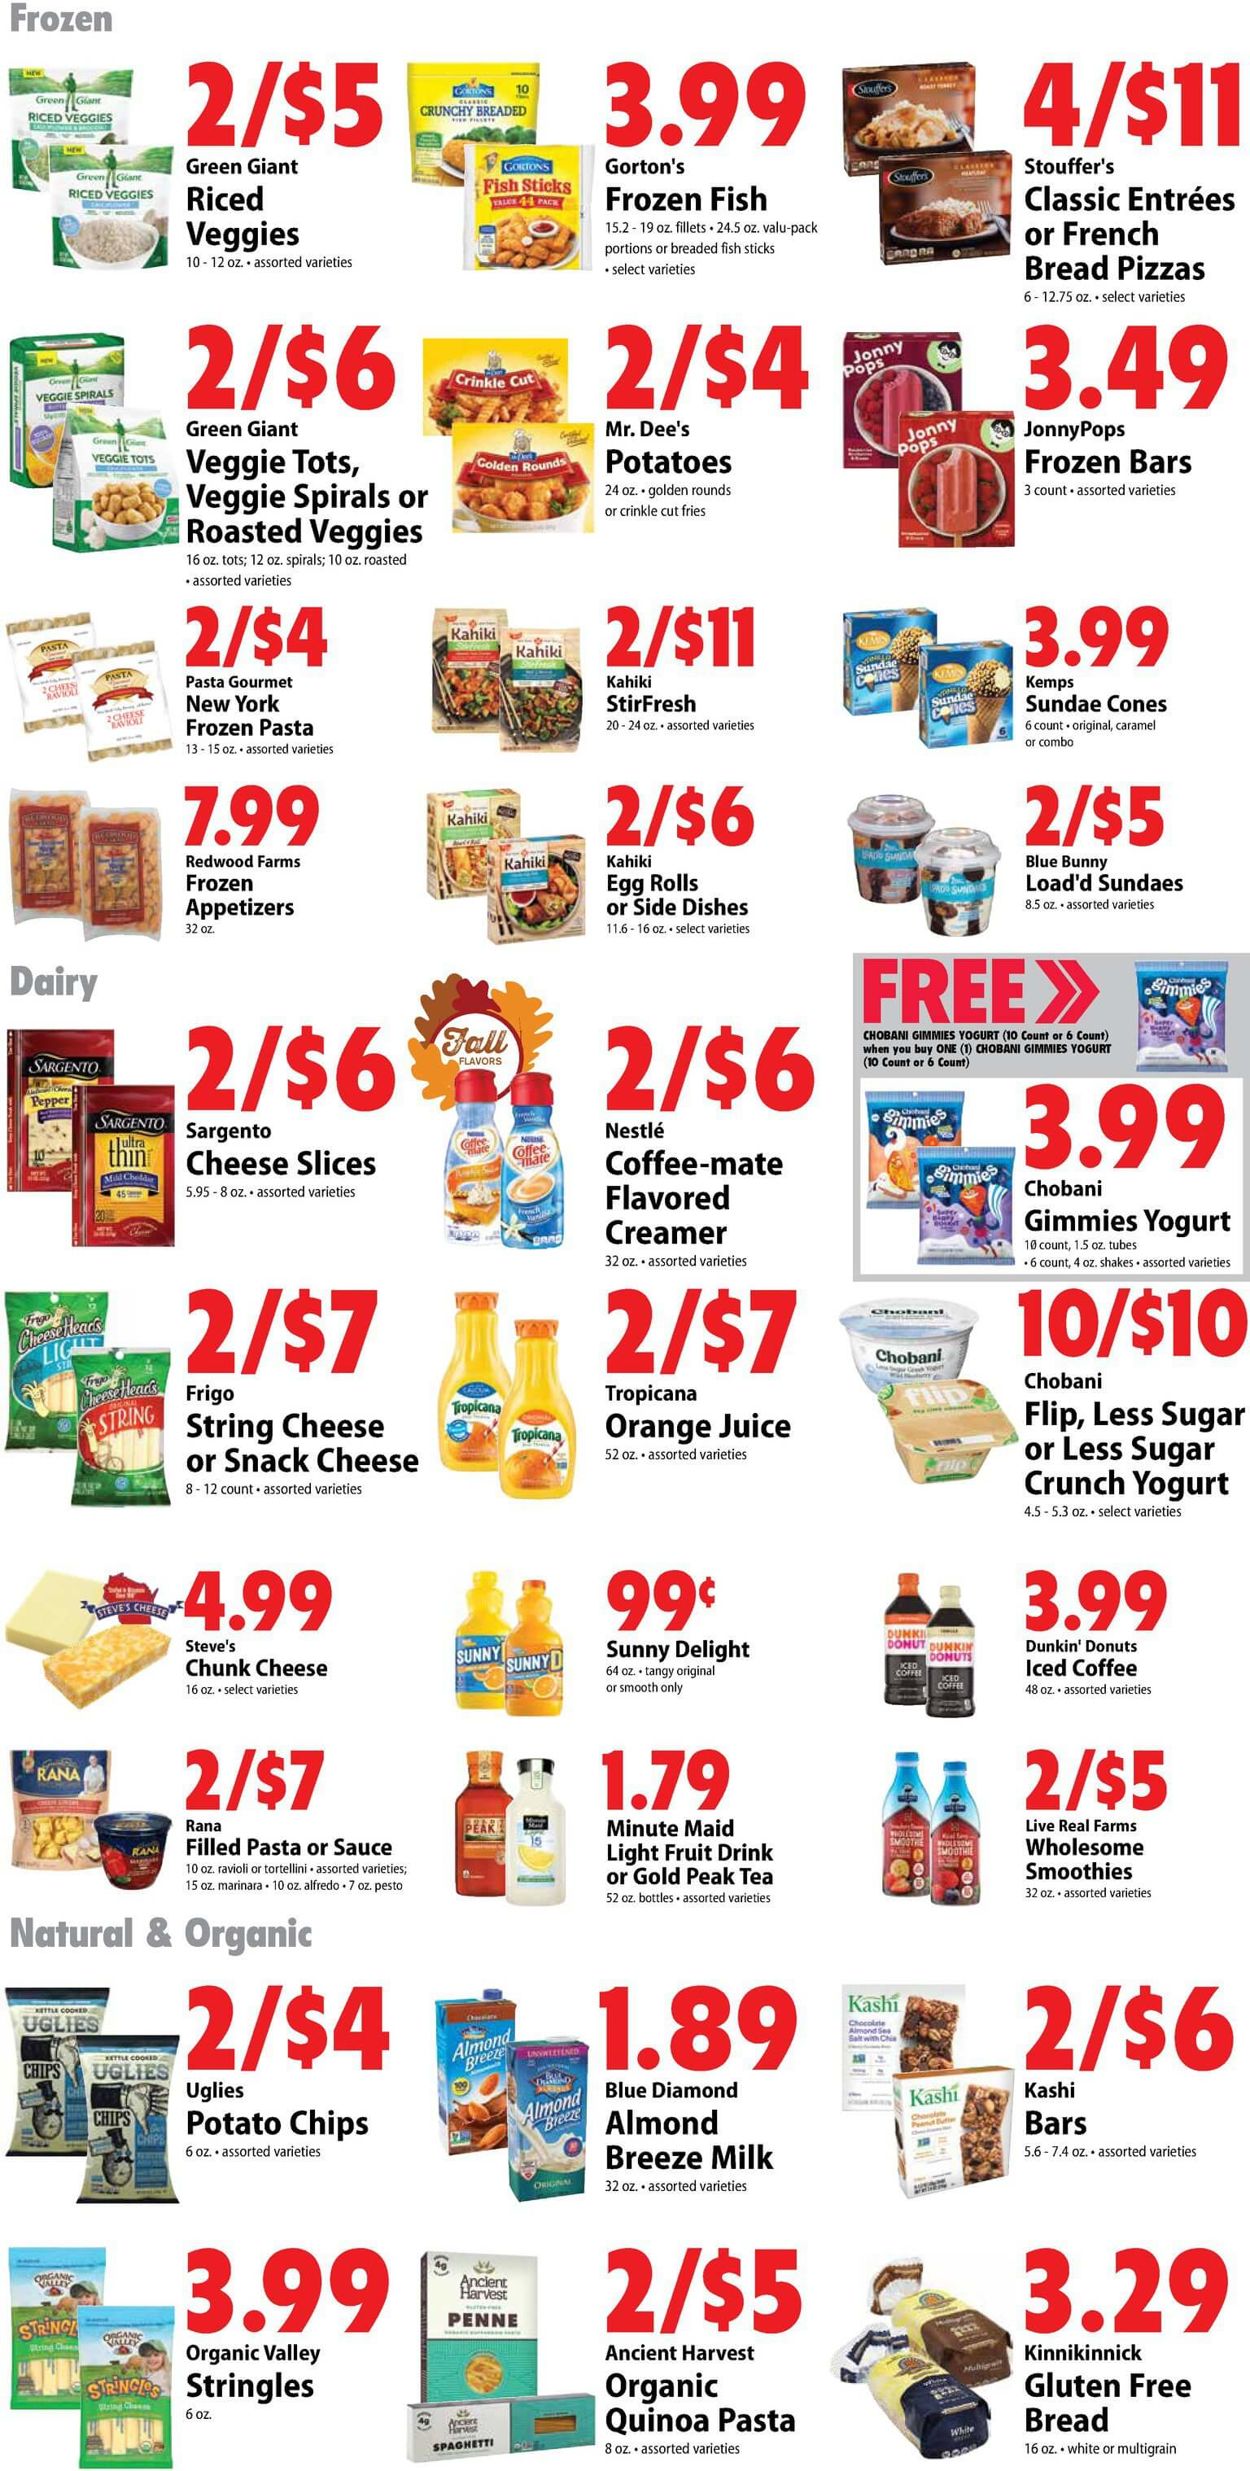 Festival Foods Current weekly ad 10/02 - 10/08/2019 [7] - frequent-ads.com